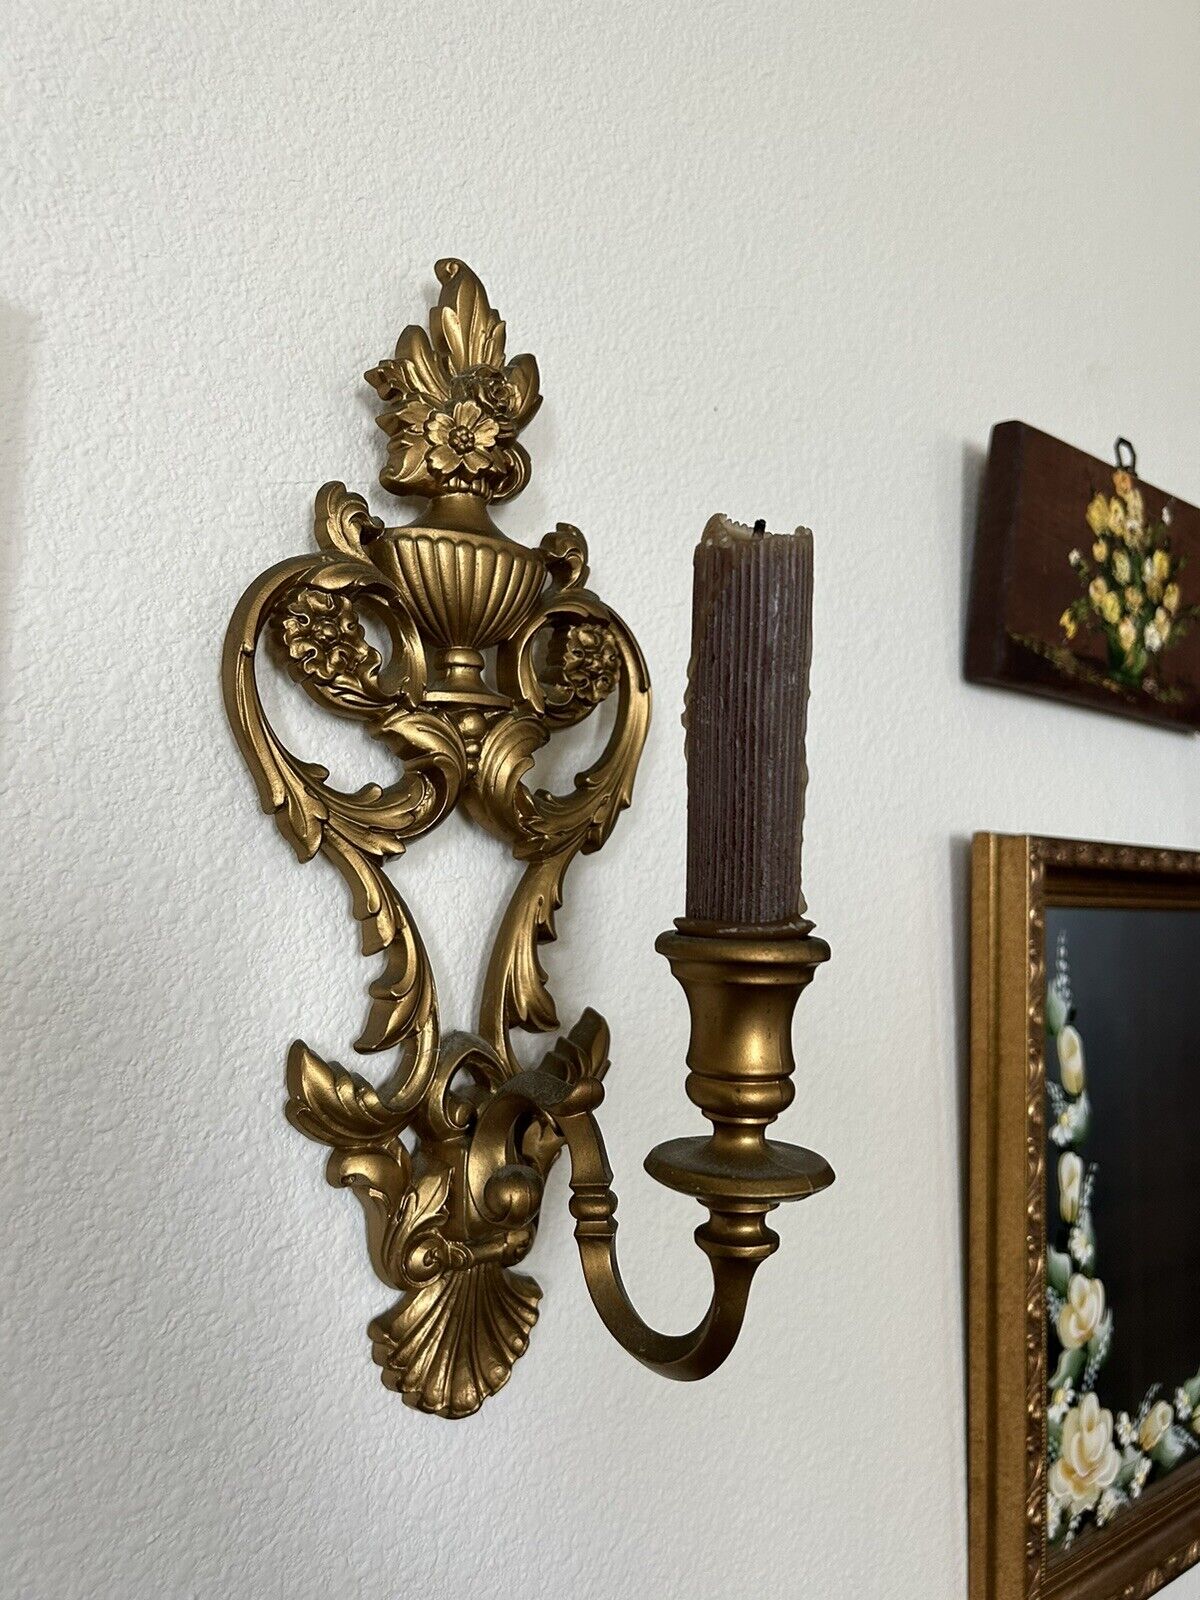 Vintage 1969 Syroco Wall Sconces Gold Flowers Hollywood Regency Decor Set Of 2